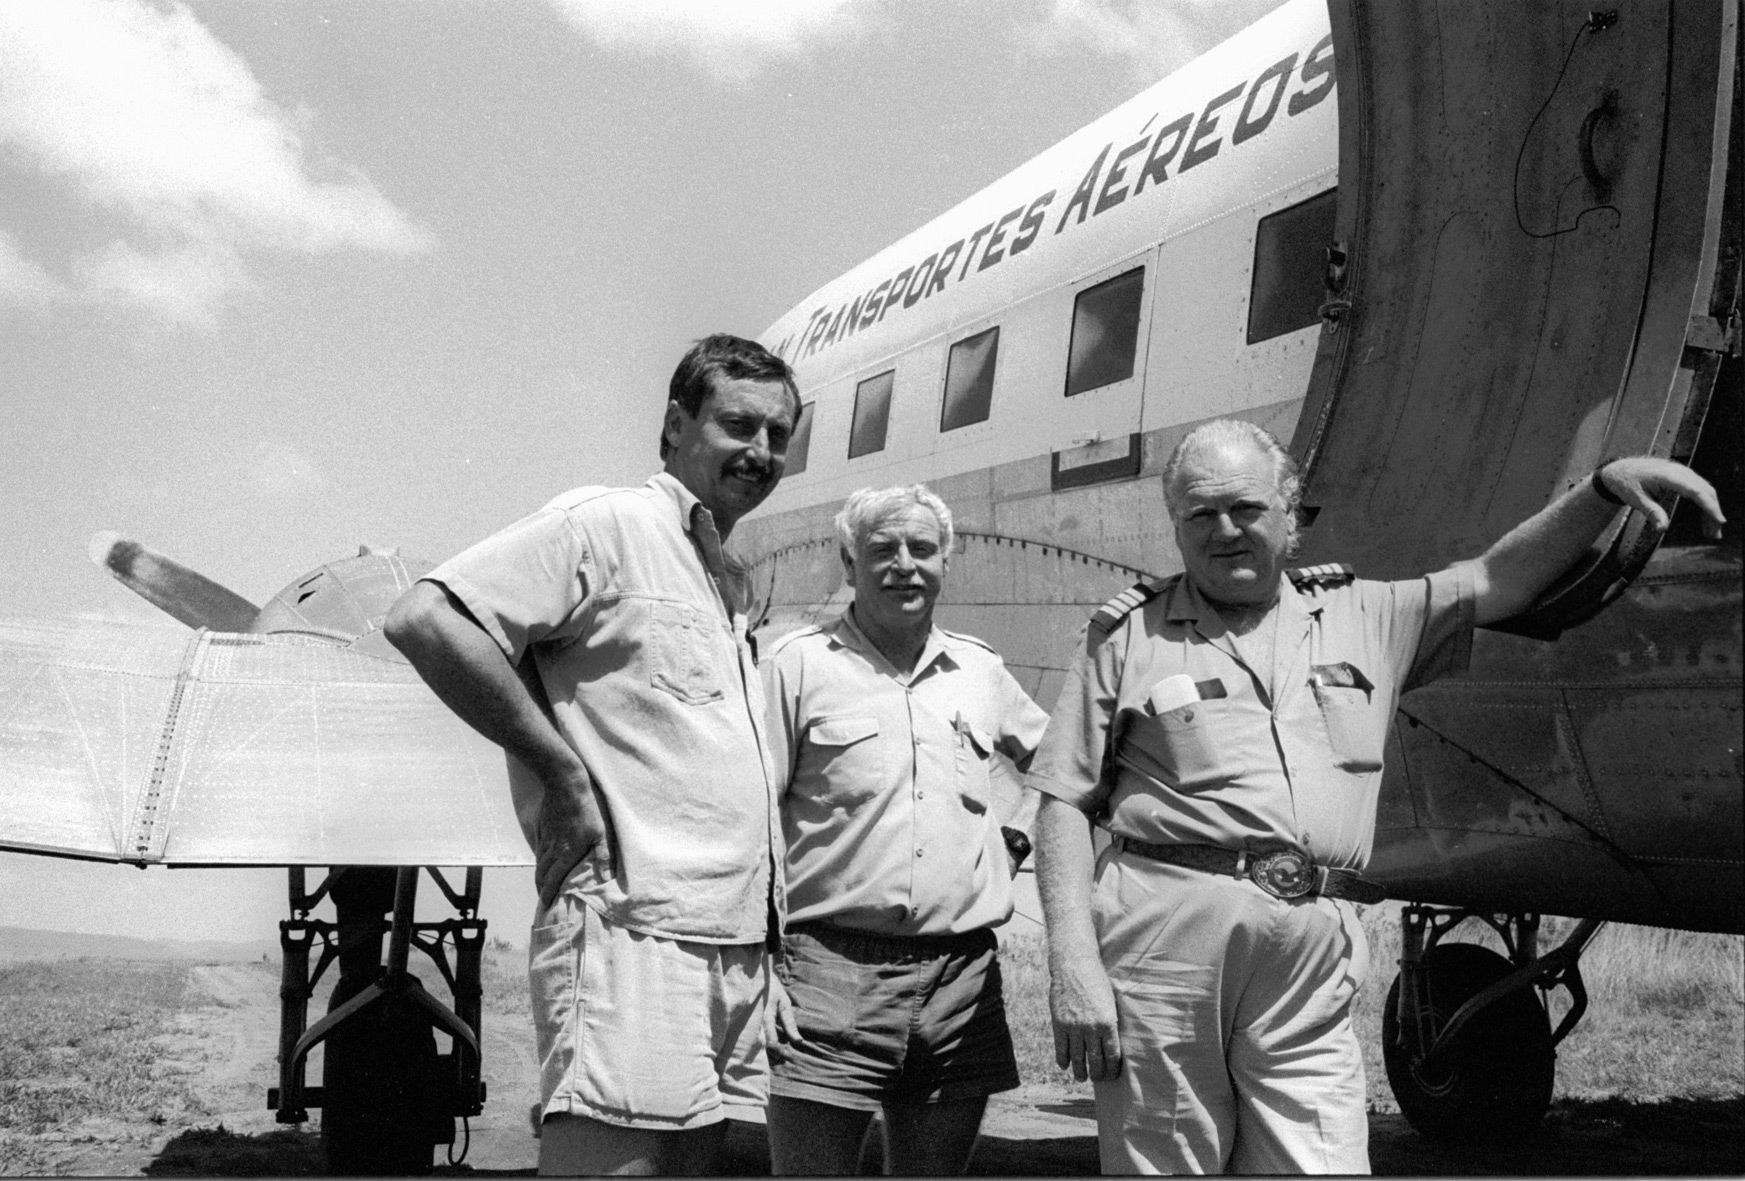 Mozambique, Sofala province, Marínguè. November 1993. The crew of Scan Air DC-3 (registration number: C/N 19006 C9-STE) during an airlift of emergency goods for displaced population. From left to right: Brian Nordan, John Murphy and chief pilot and Scan Air CEO Oscar Hermannson. The same team fatally crashed with this Douglas DC-3 near Molema in Tete province on 22 November 1993. Only John Murphy survived.